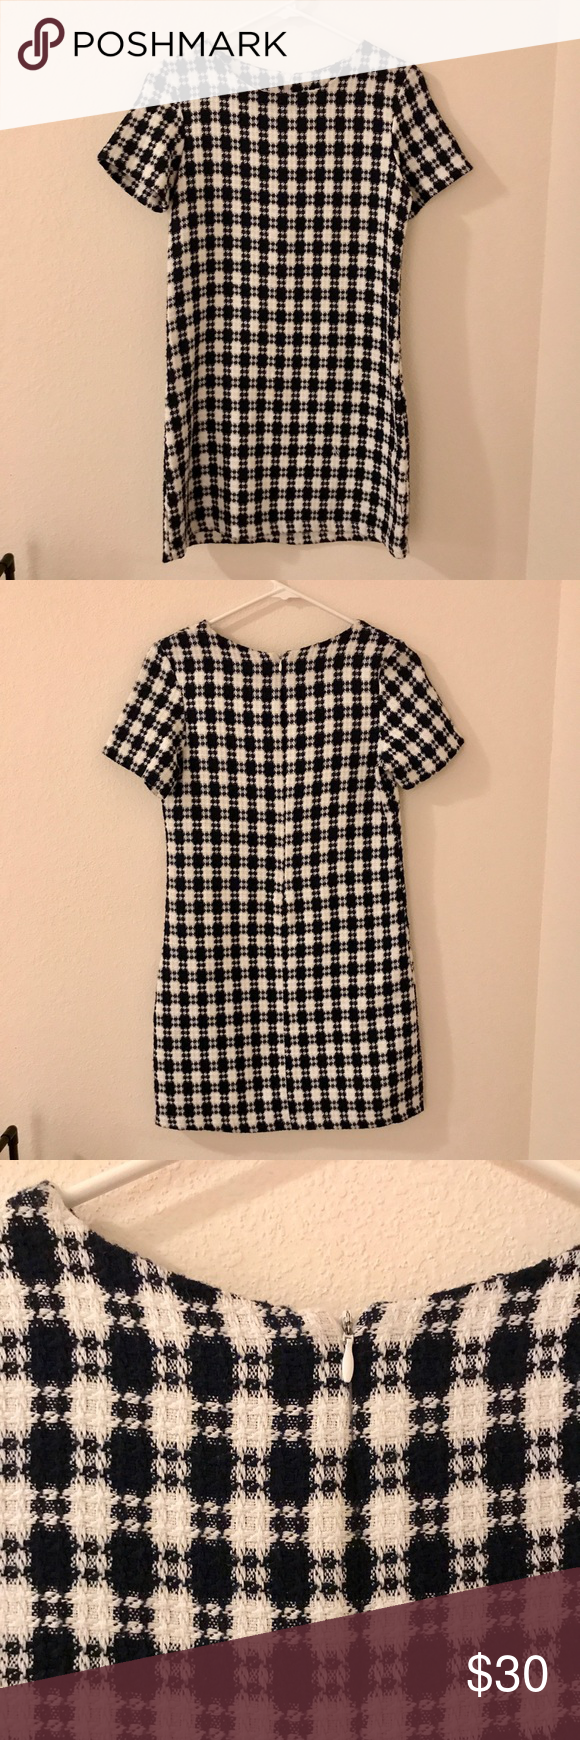 Boohoo black and white dress Boohoo dress: perfect condition Size small